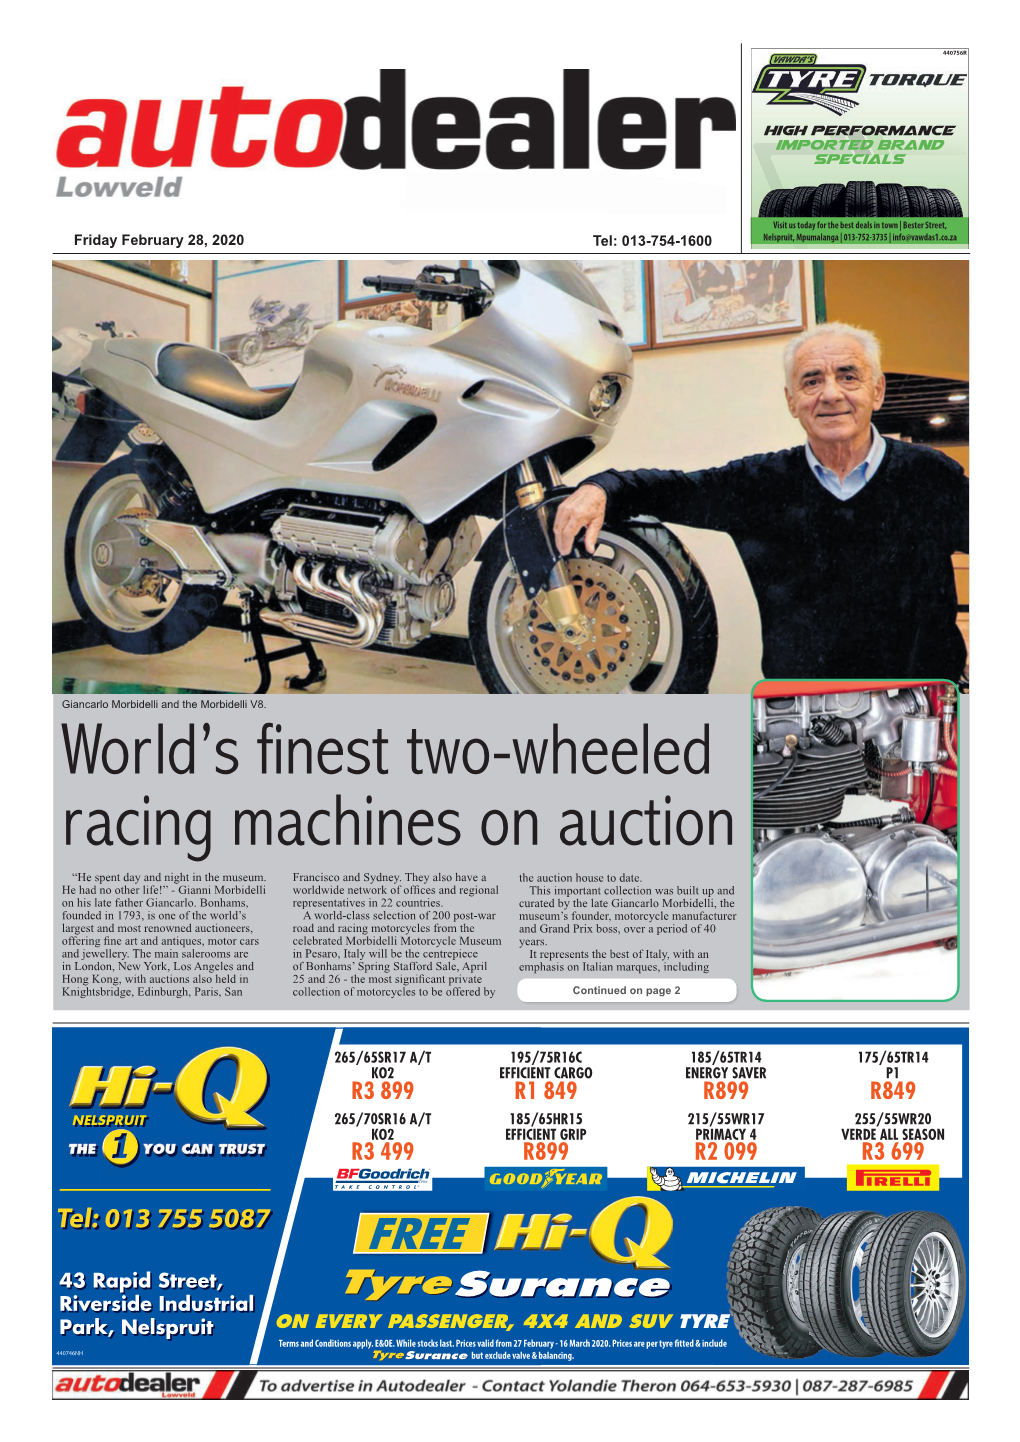 World's Finest Two-Wheeled Racing Machines on Auction